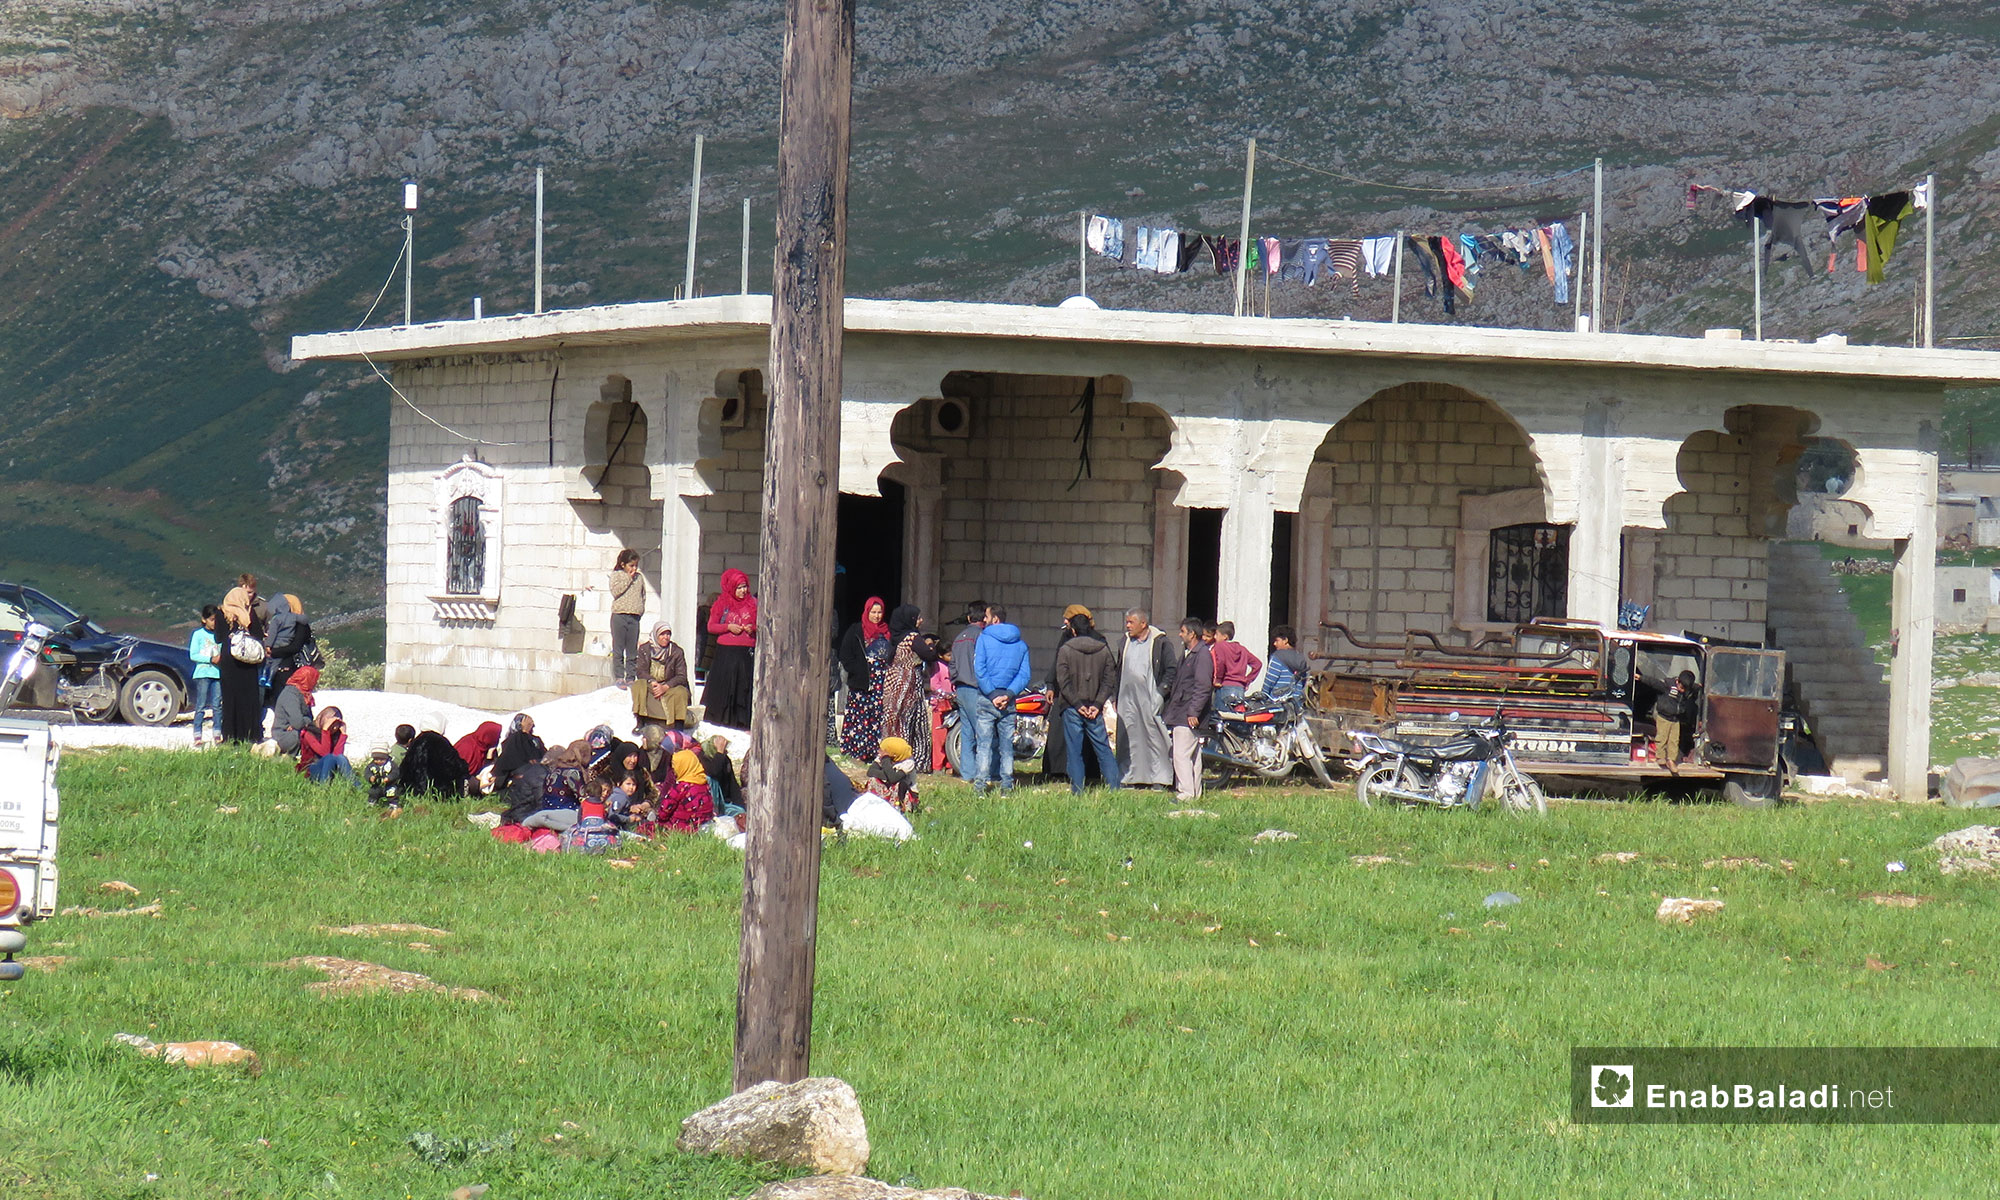 The displacement of people from the village of al-Huwayz to the village of Shair al-Maghar, under the protection of the Turkish observation point in al-Ghab Plain – March 18, 2019 (Enab Baladi)